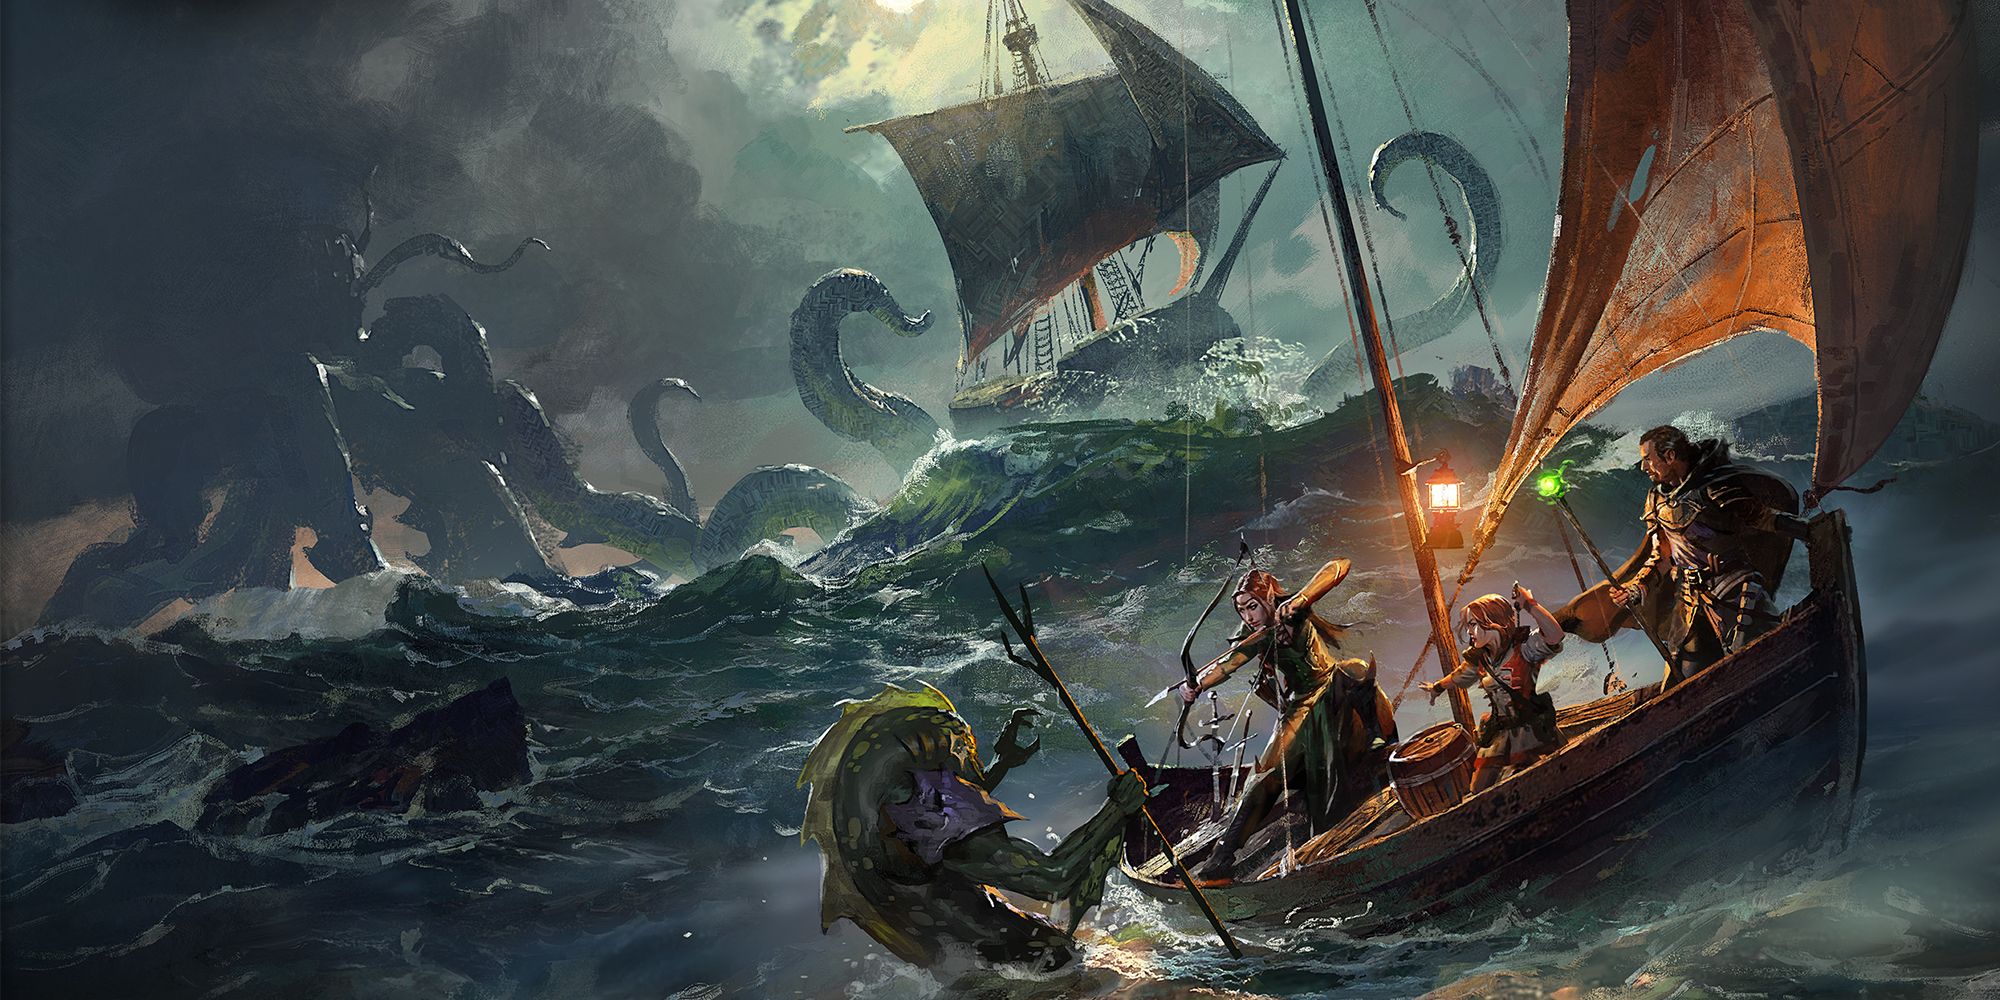 dungeons-dragons-tv-show-in-development-from-john-wick-writer